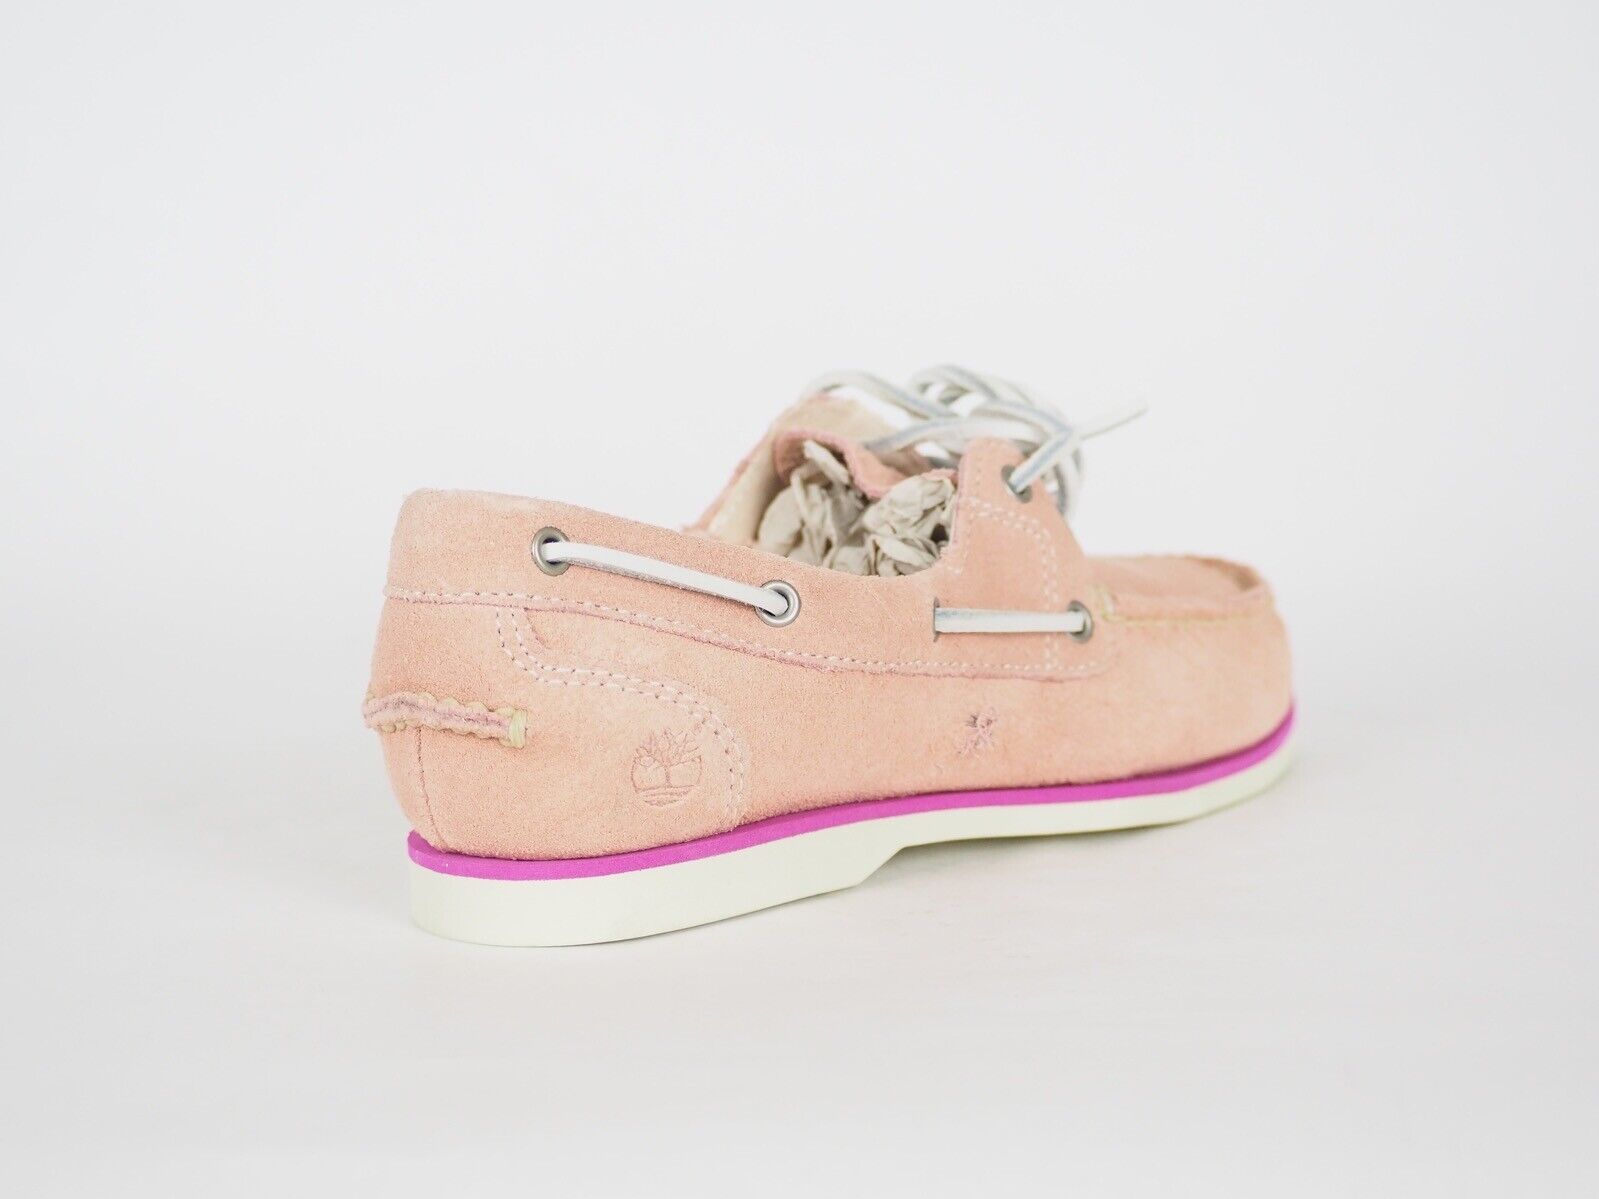 Womens Timberland Marin 8345B Light Pink Leather Flats Casual Boat Shoes UK 5